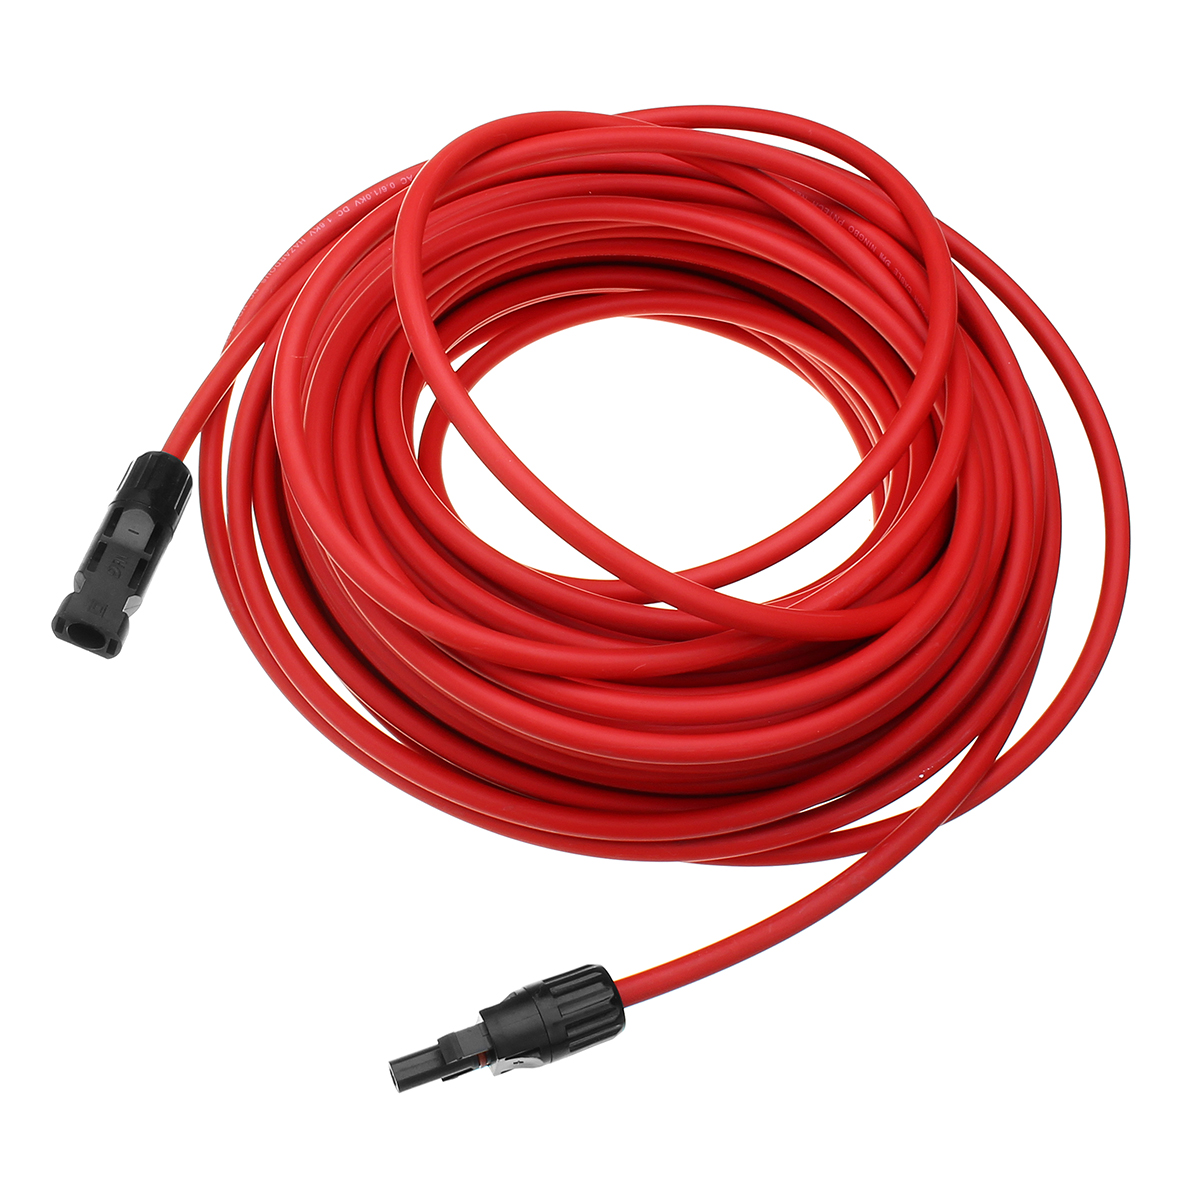 10-AWG-10-Meter-Solar-Panel-Extension-Cable-Wire-BlackRed-with-MC4-Connectors-1338696-1